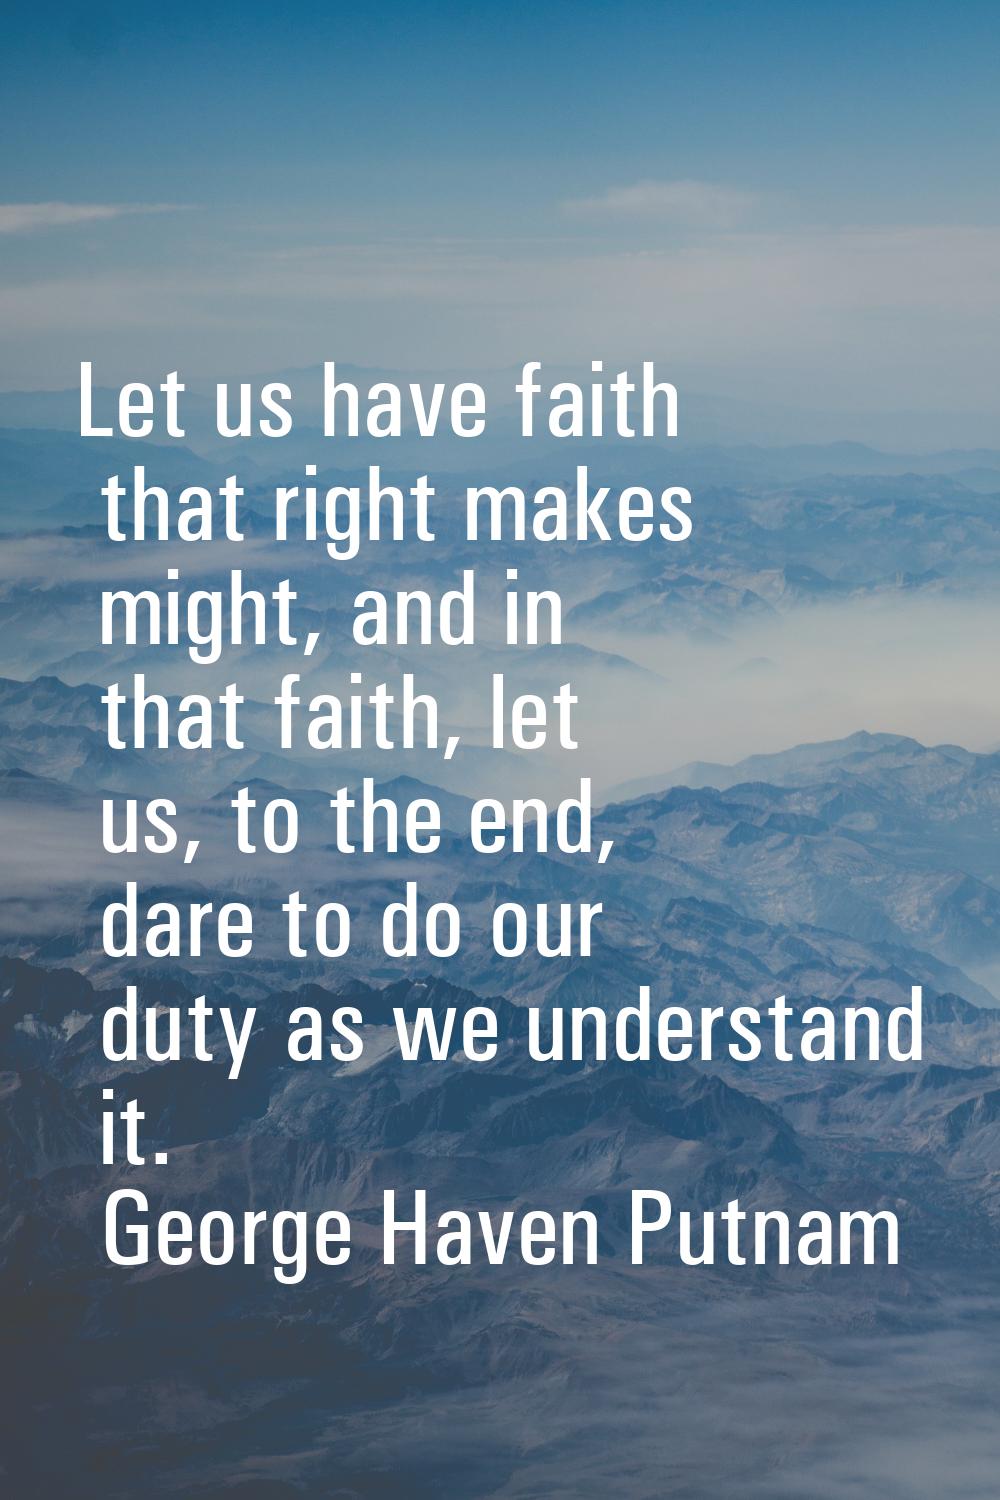 Let us have faith that right makes might, and in that faith, let us, to the end, dare to do our dut